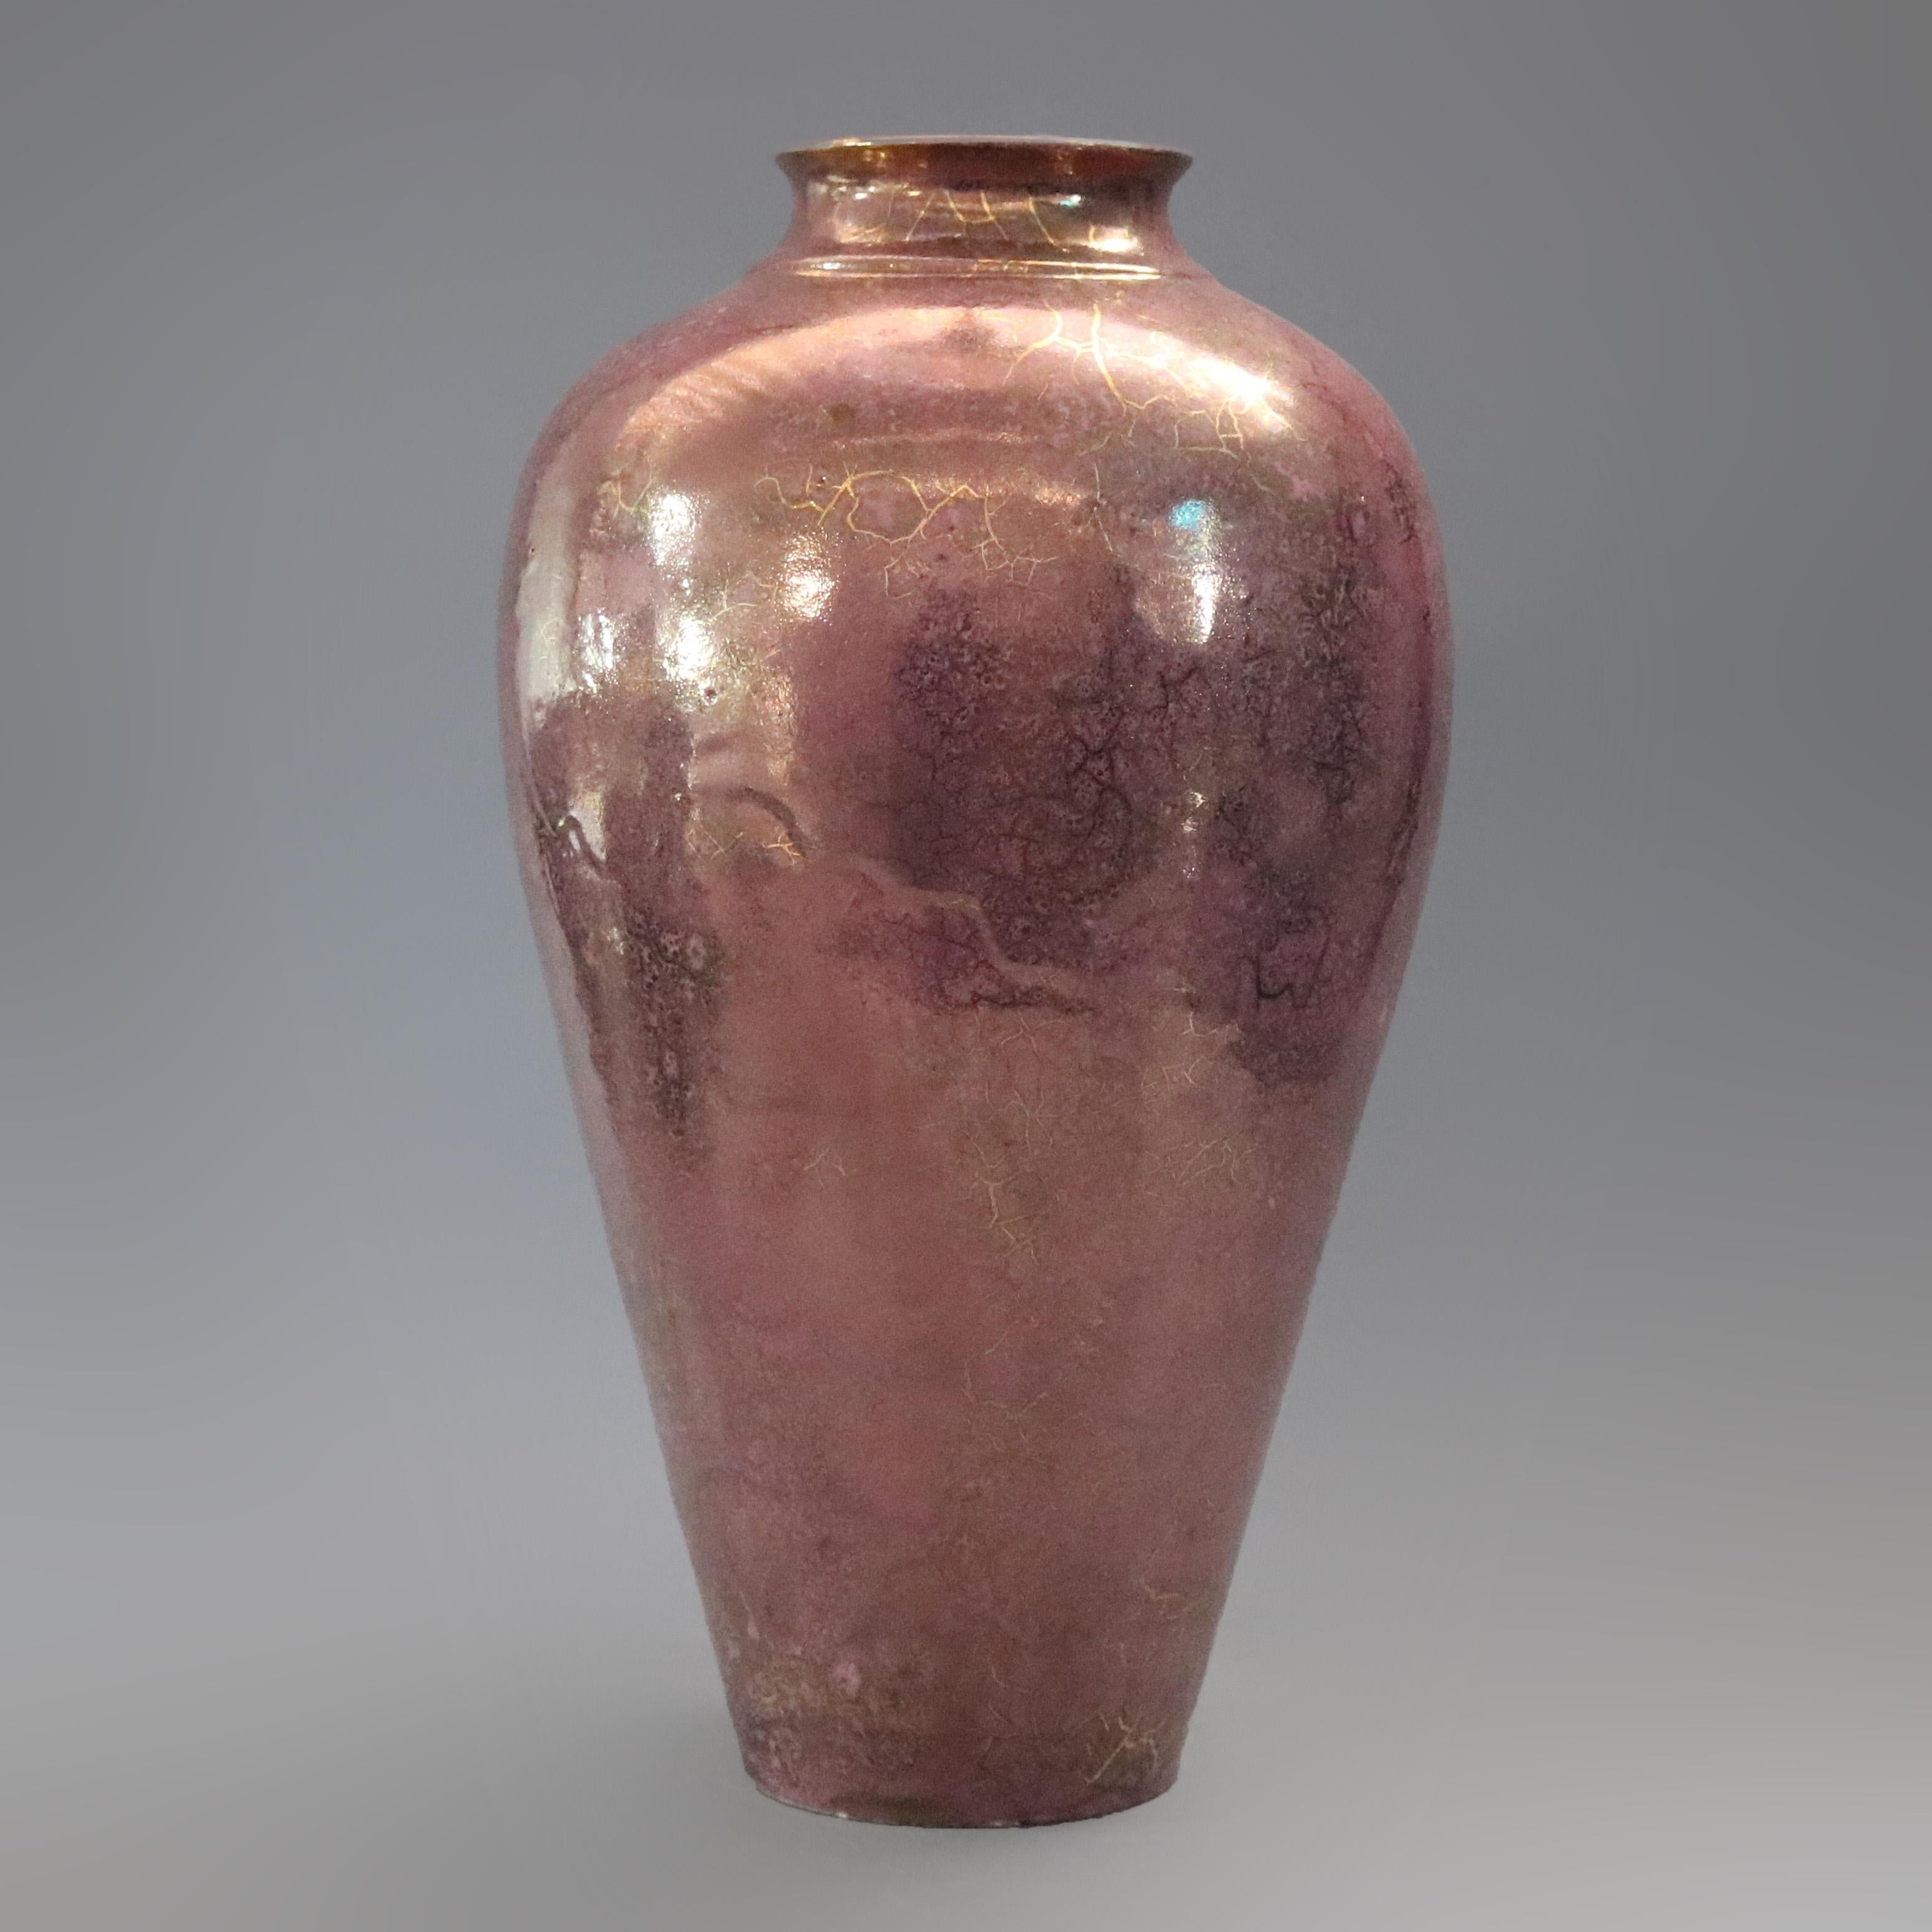 A vintage rose luster hand thrown art pottery floor vase offers urn form with metalic finish, circa 1960.

Measures - 23.25